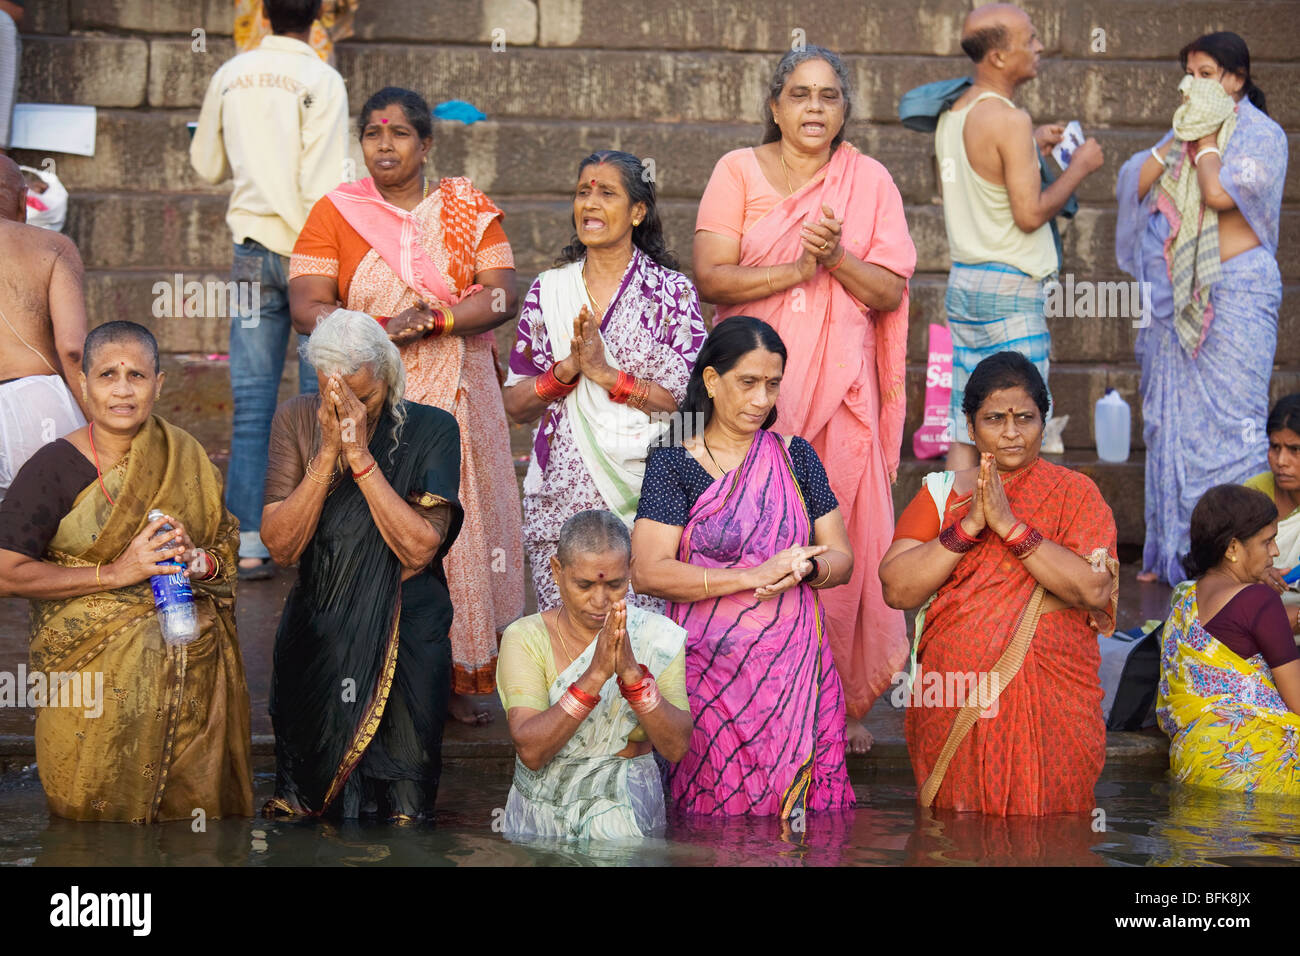 People come to pray and bathe in the holy waters of the Ganges River at Varanasi, India Stock Photo